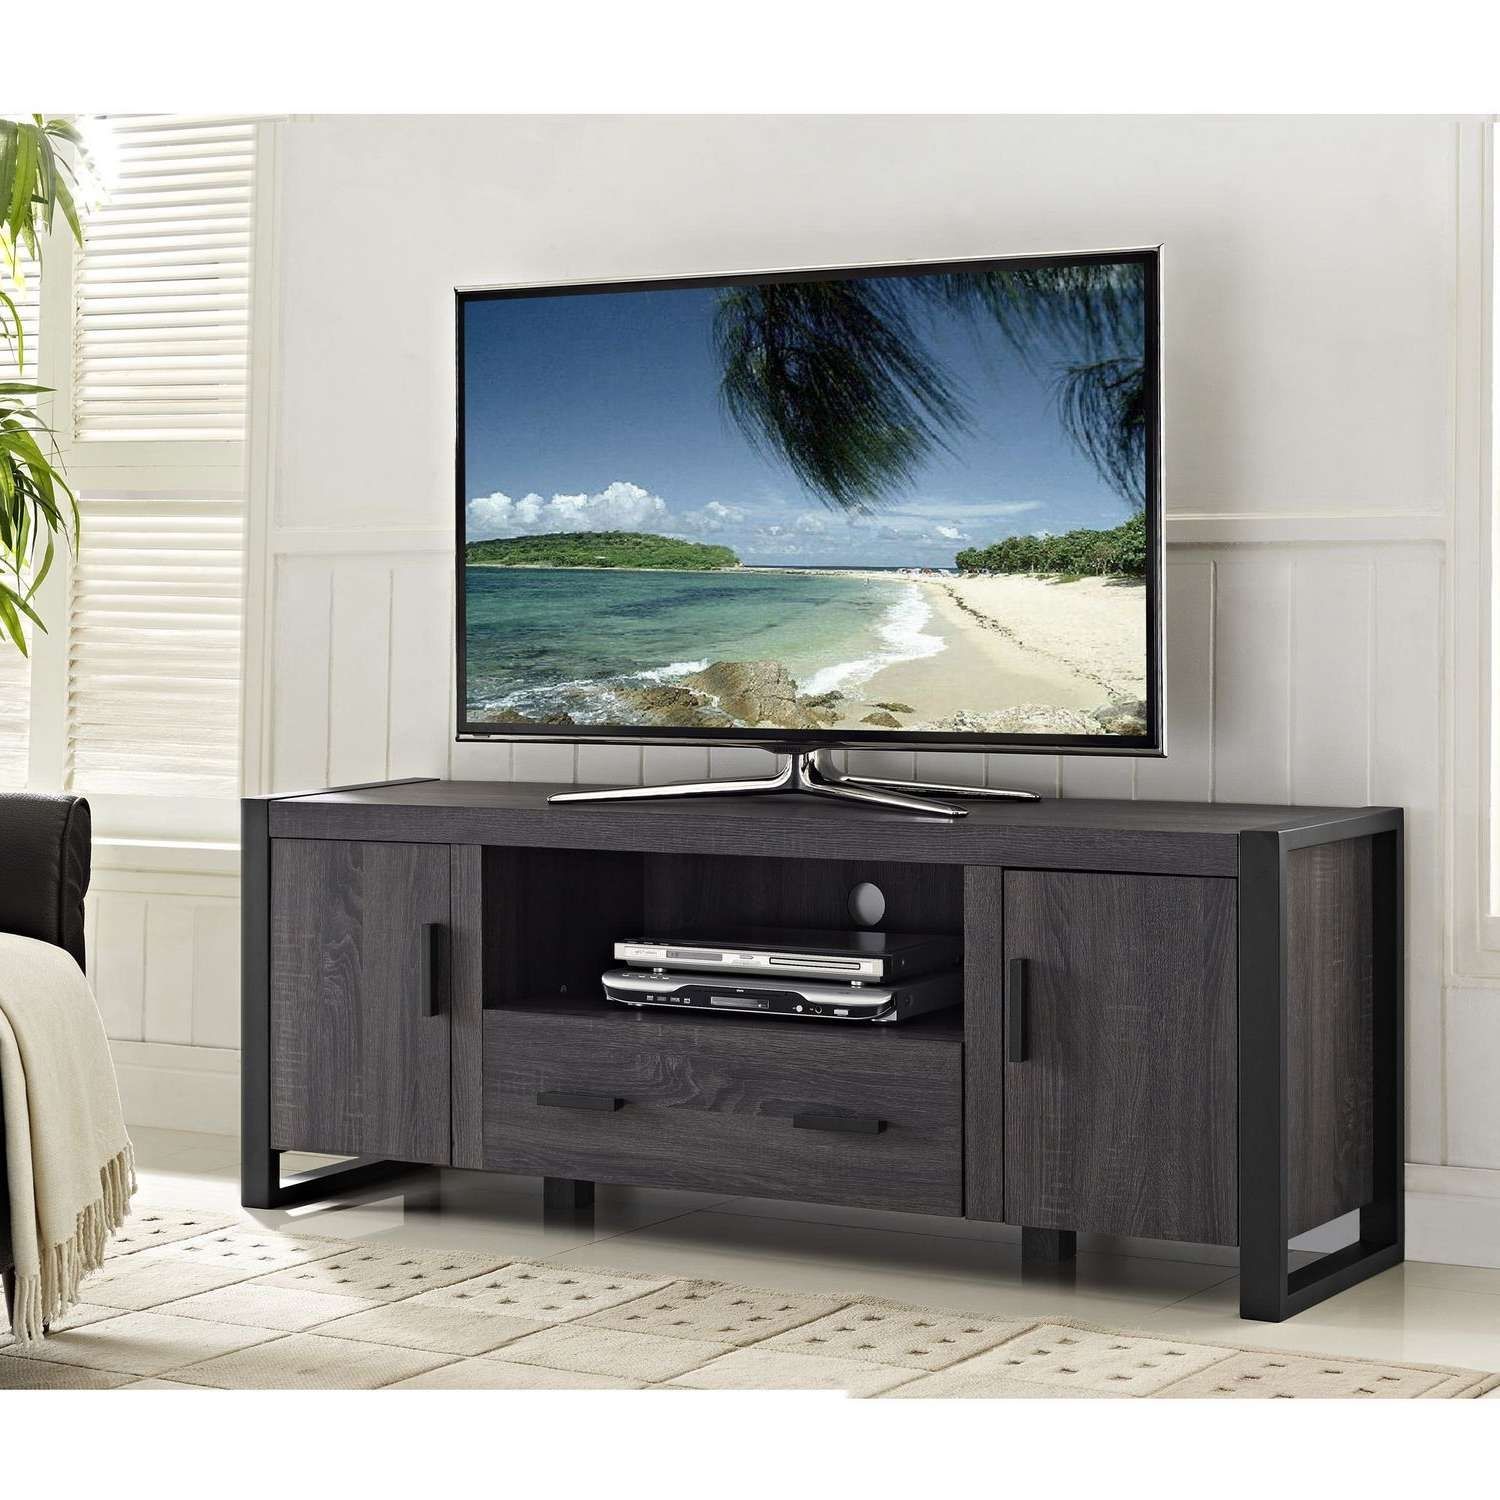 We Furniture 60" Grey Wood Tv Stand Console | Walmart Canada Throughout Wooden Tv Stands (View 14 of 15)